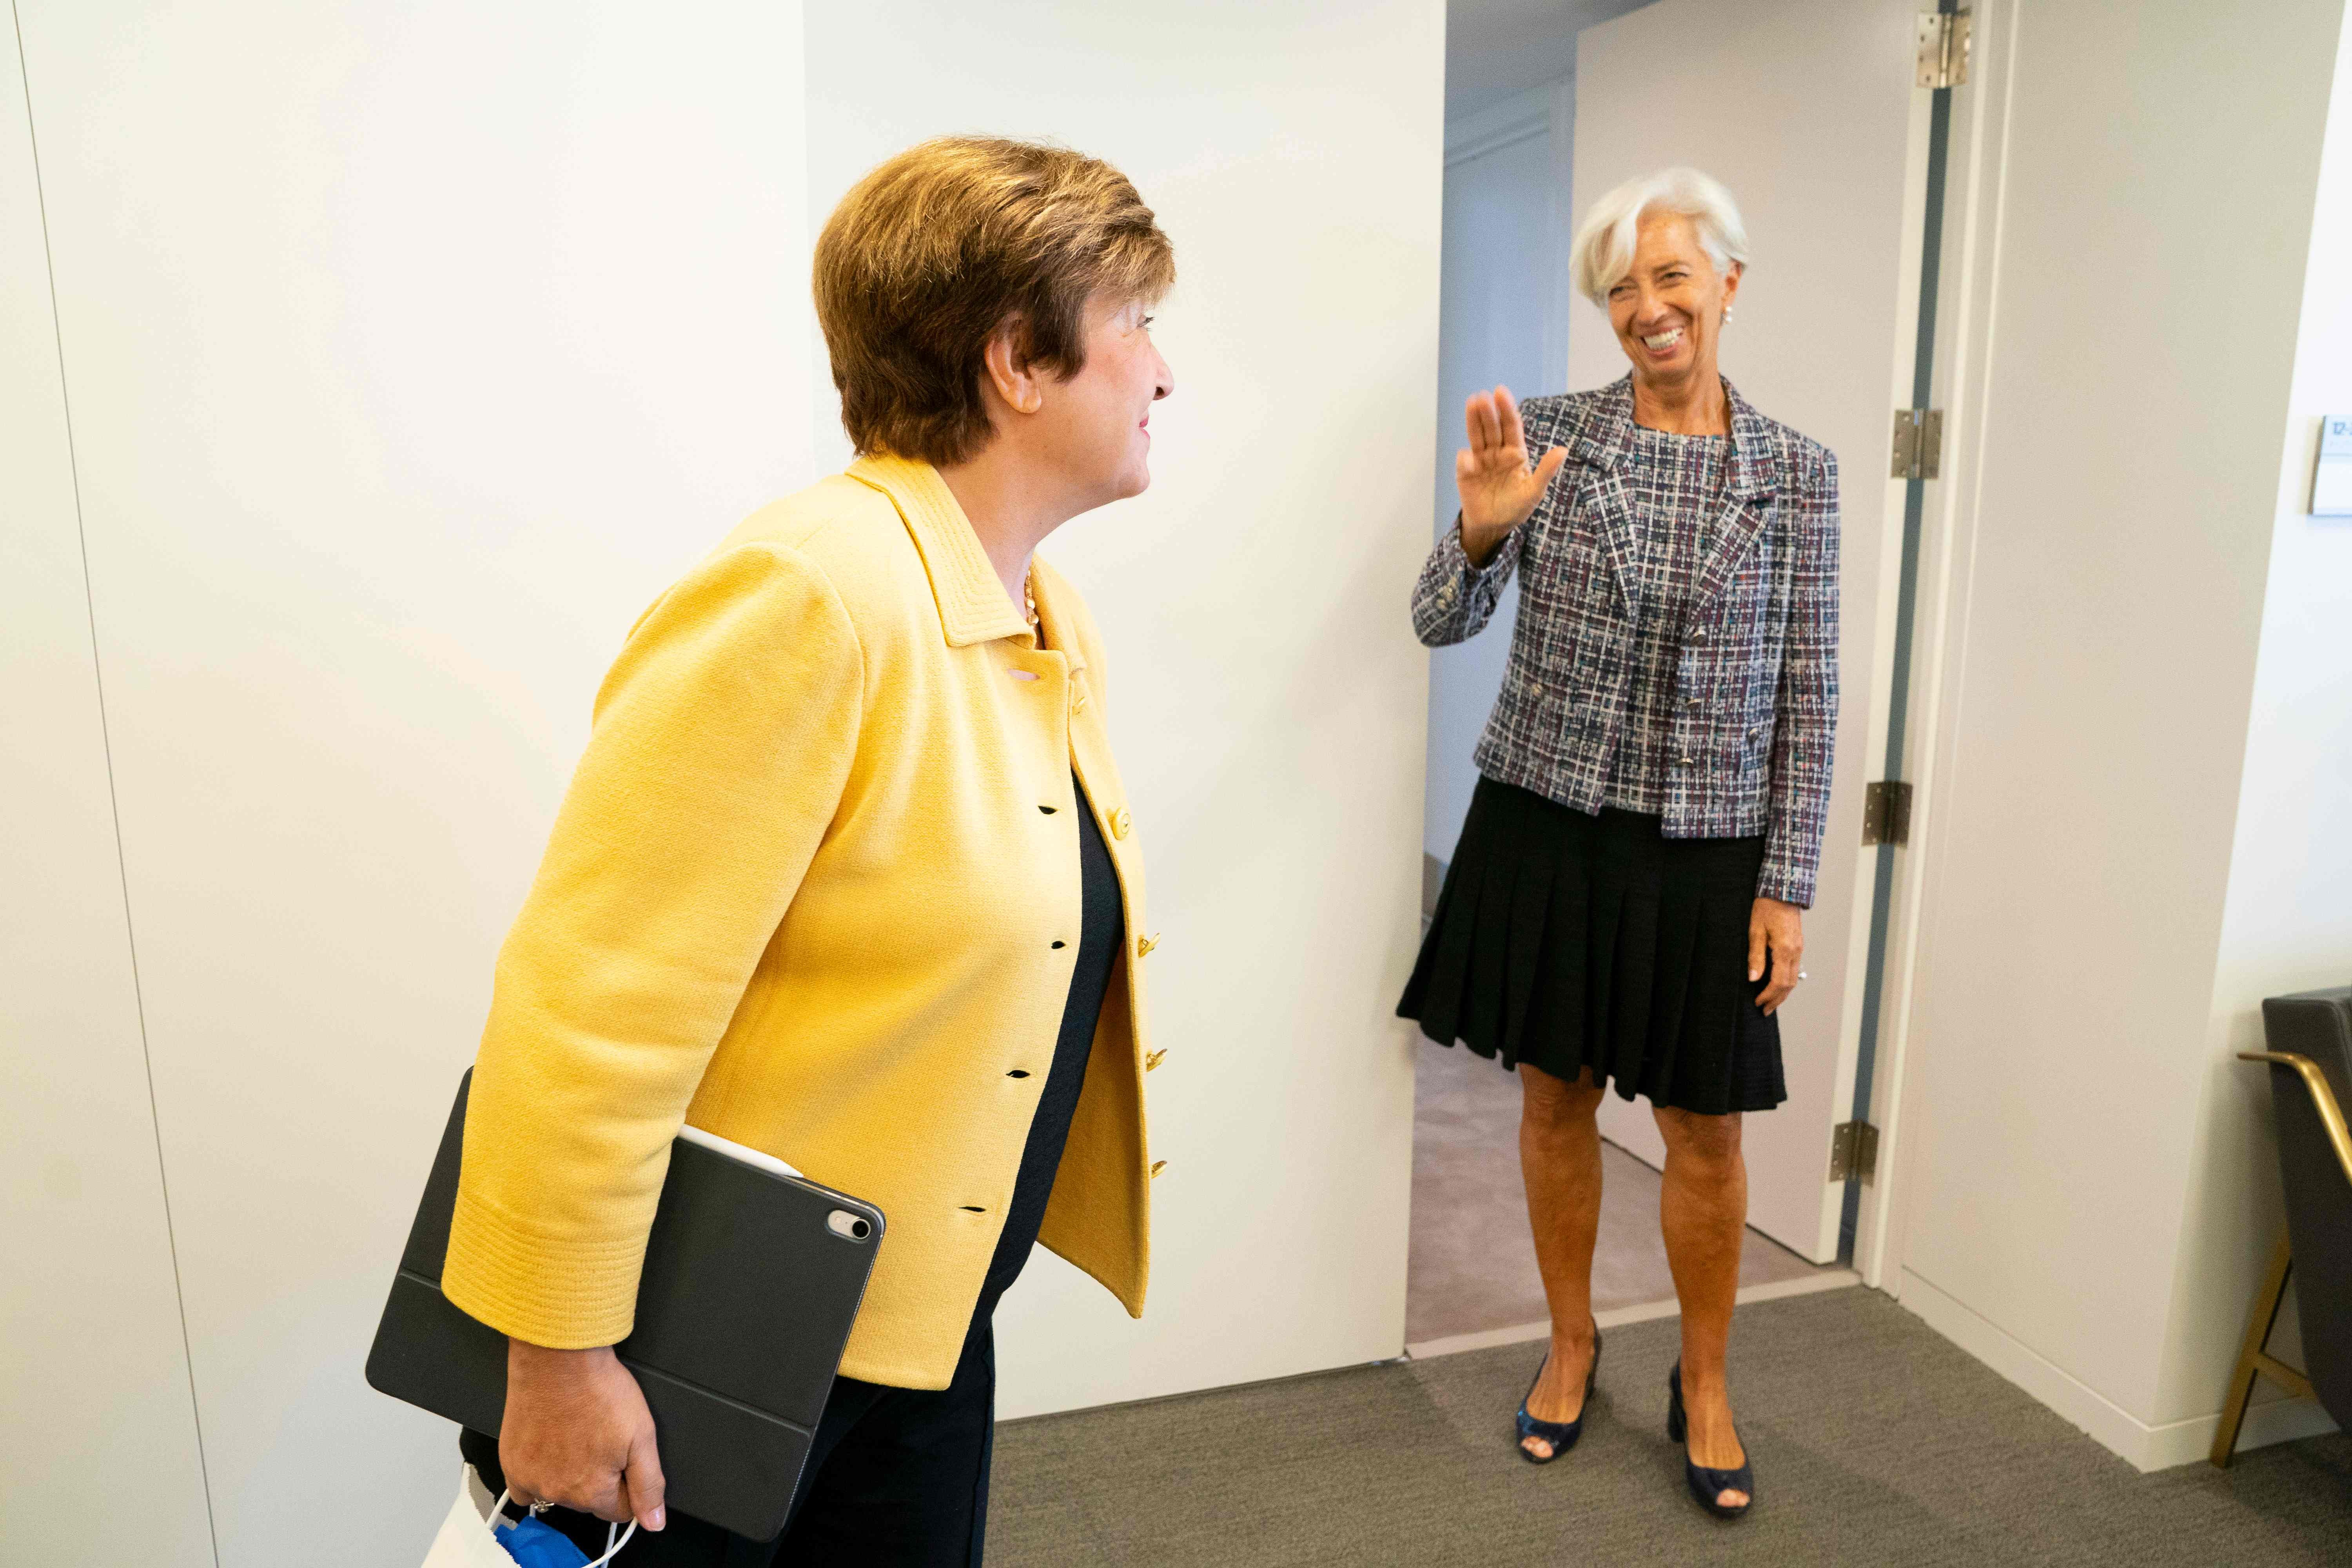 Then International Monetary Fund managing director Christine Lagarde (right) waves from her office in Washington on September 20 after meeting her successor Kristalina Georgieva. The anachronistic “gentlemen’s agreement” that has kept an American in charge of the World Bank and a European in charge of the IMF has proved resilient. Photo: AFP